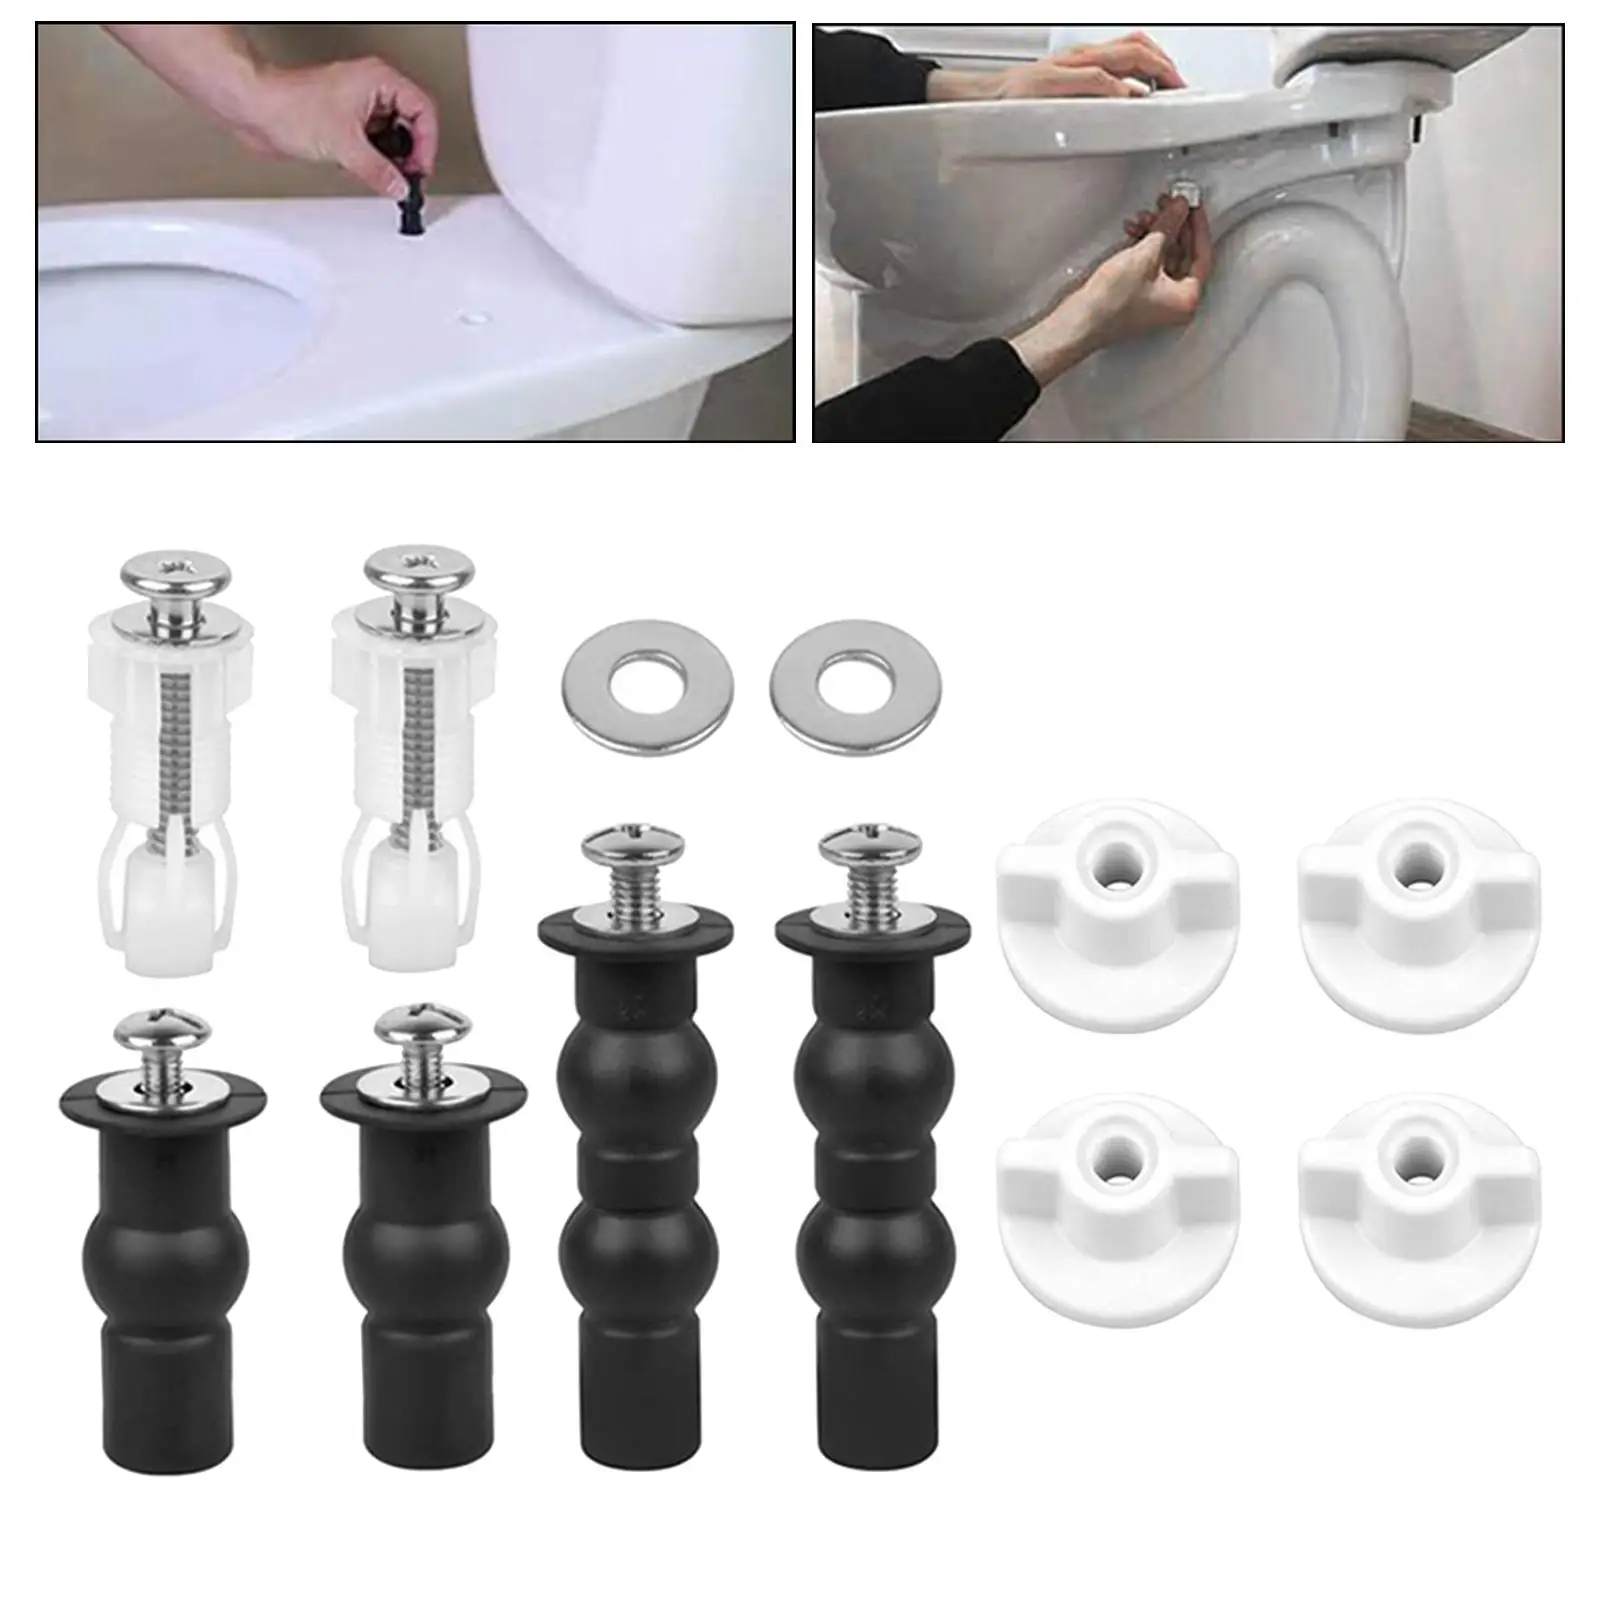 Universal Screw Toilet Toilet Seat Hinges Screws Toilet Cover Accessories Replacement Rubber Spreader Bolts 304 Stainless Steel